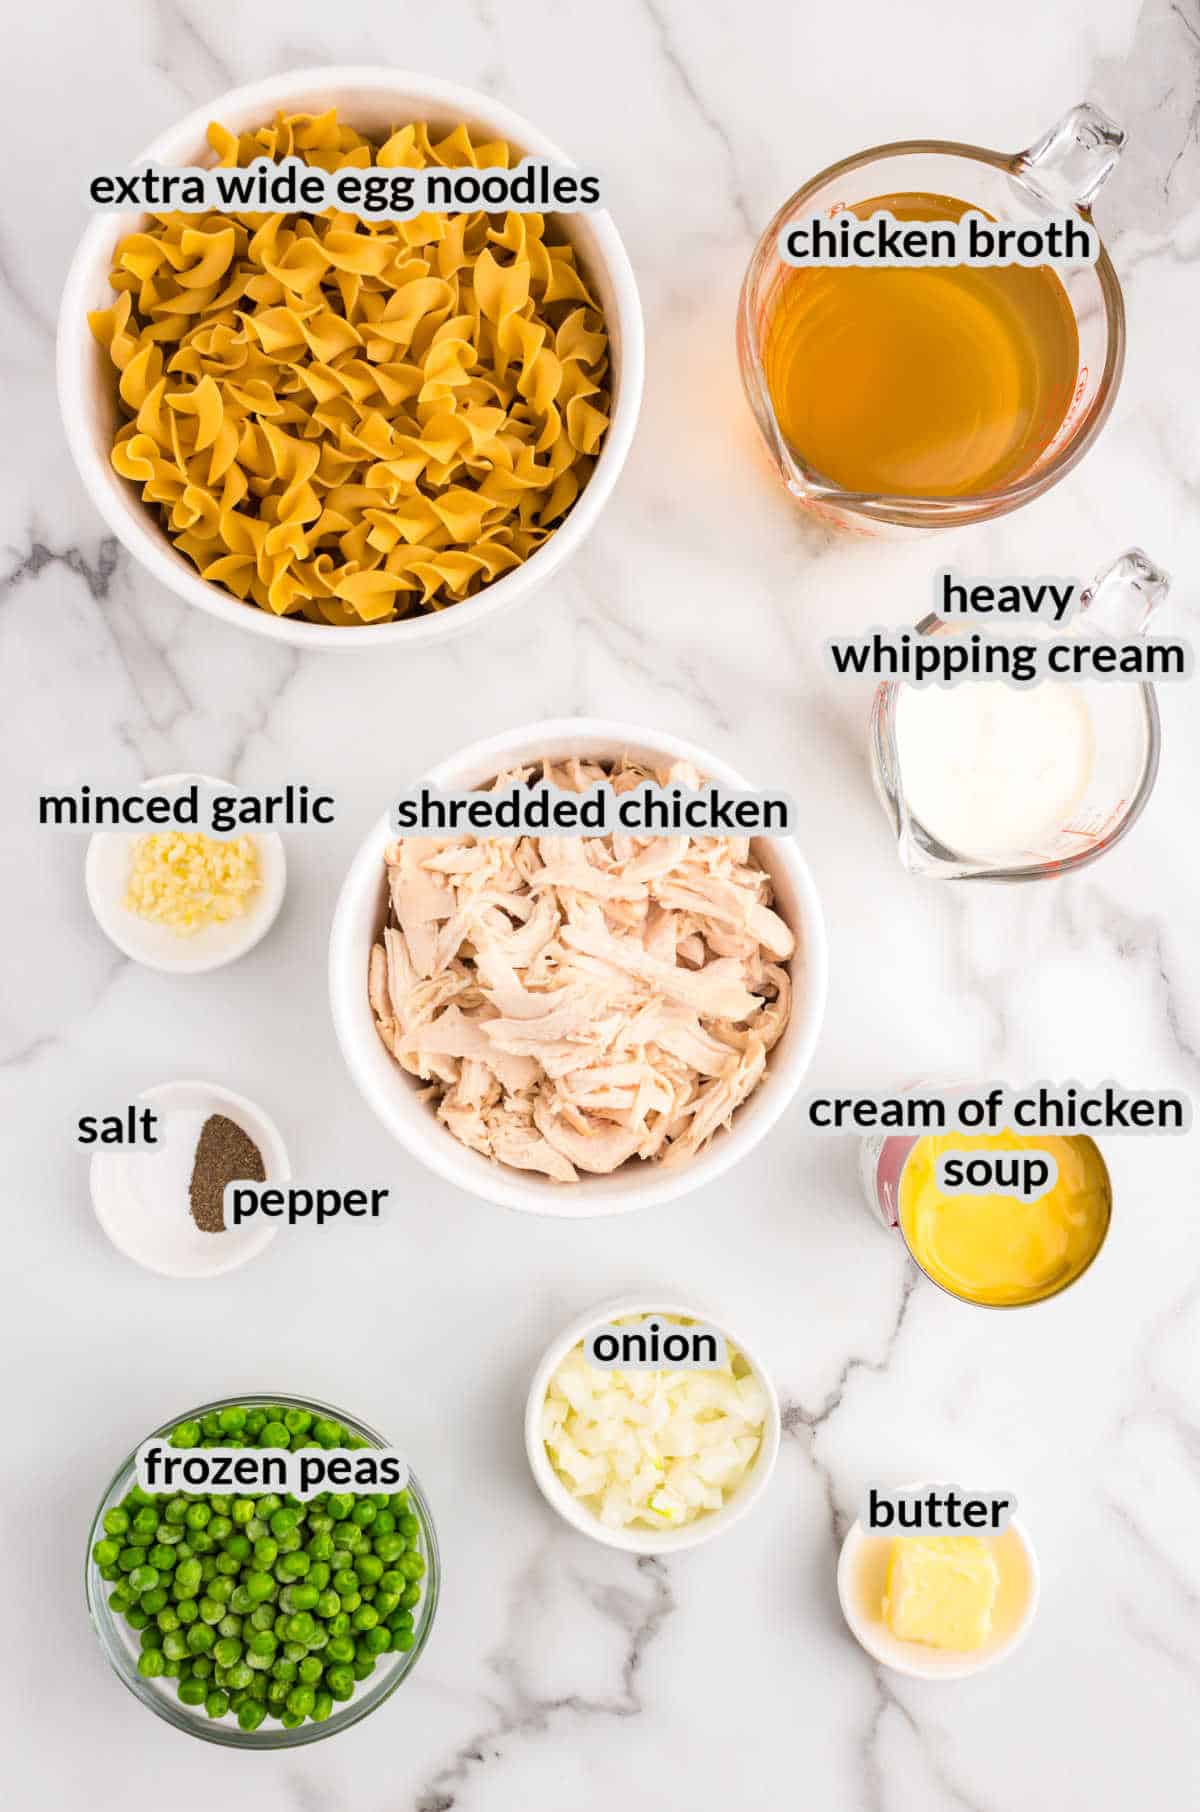 Overhead Image of Chicken and Noodles Ingredients